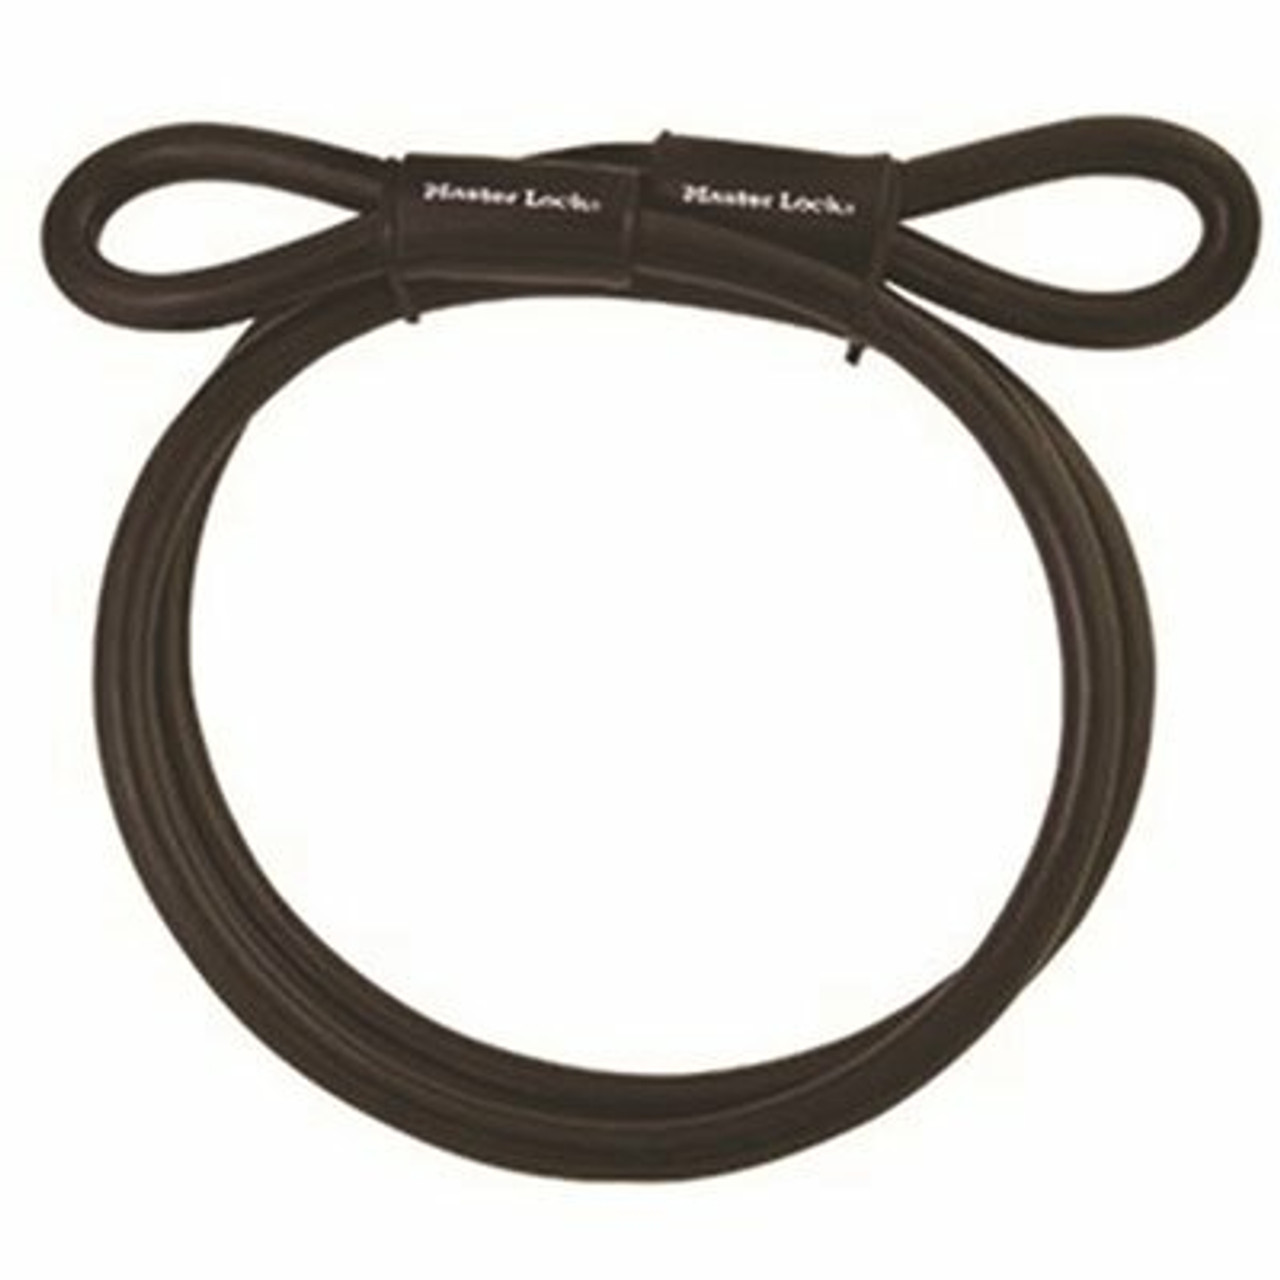 Master Lock 3/8 In. X 6 Ft. Cable